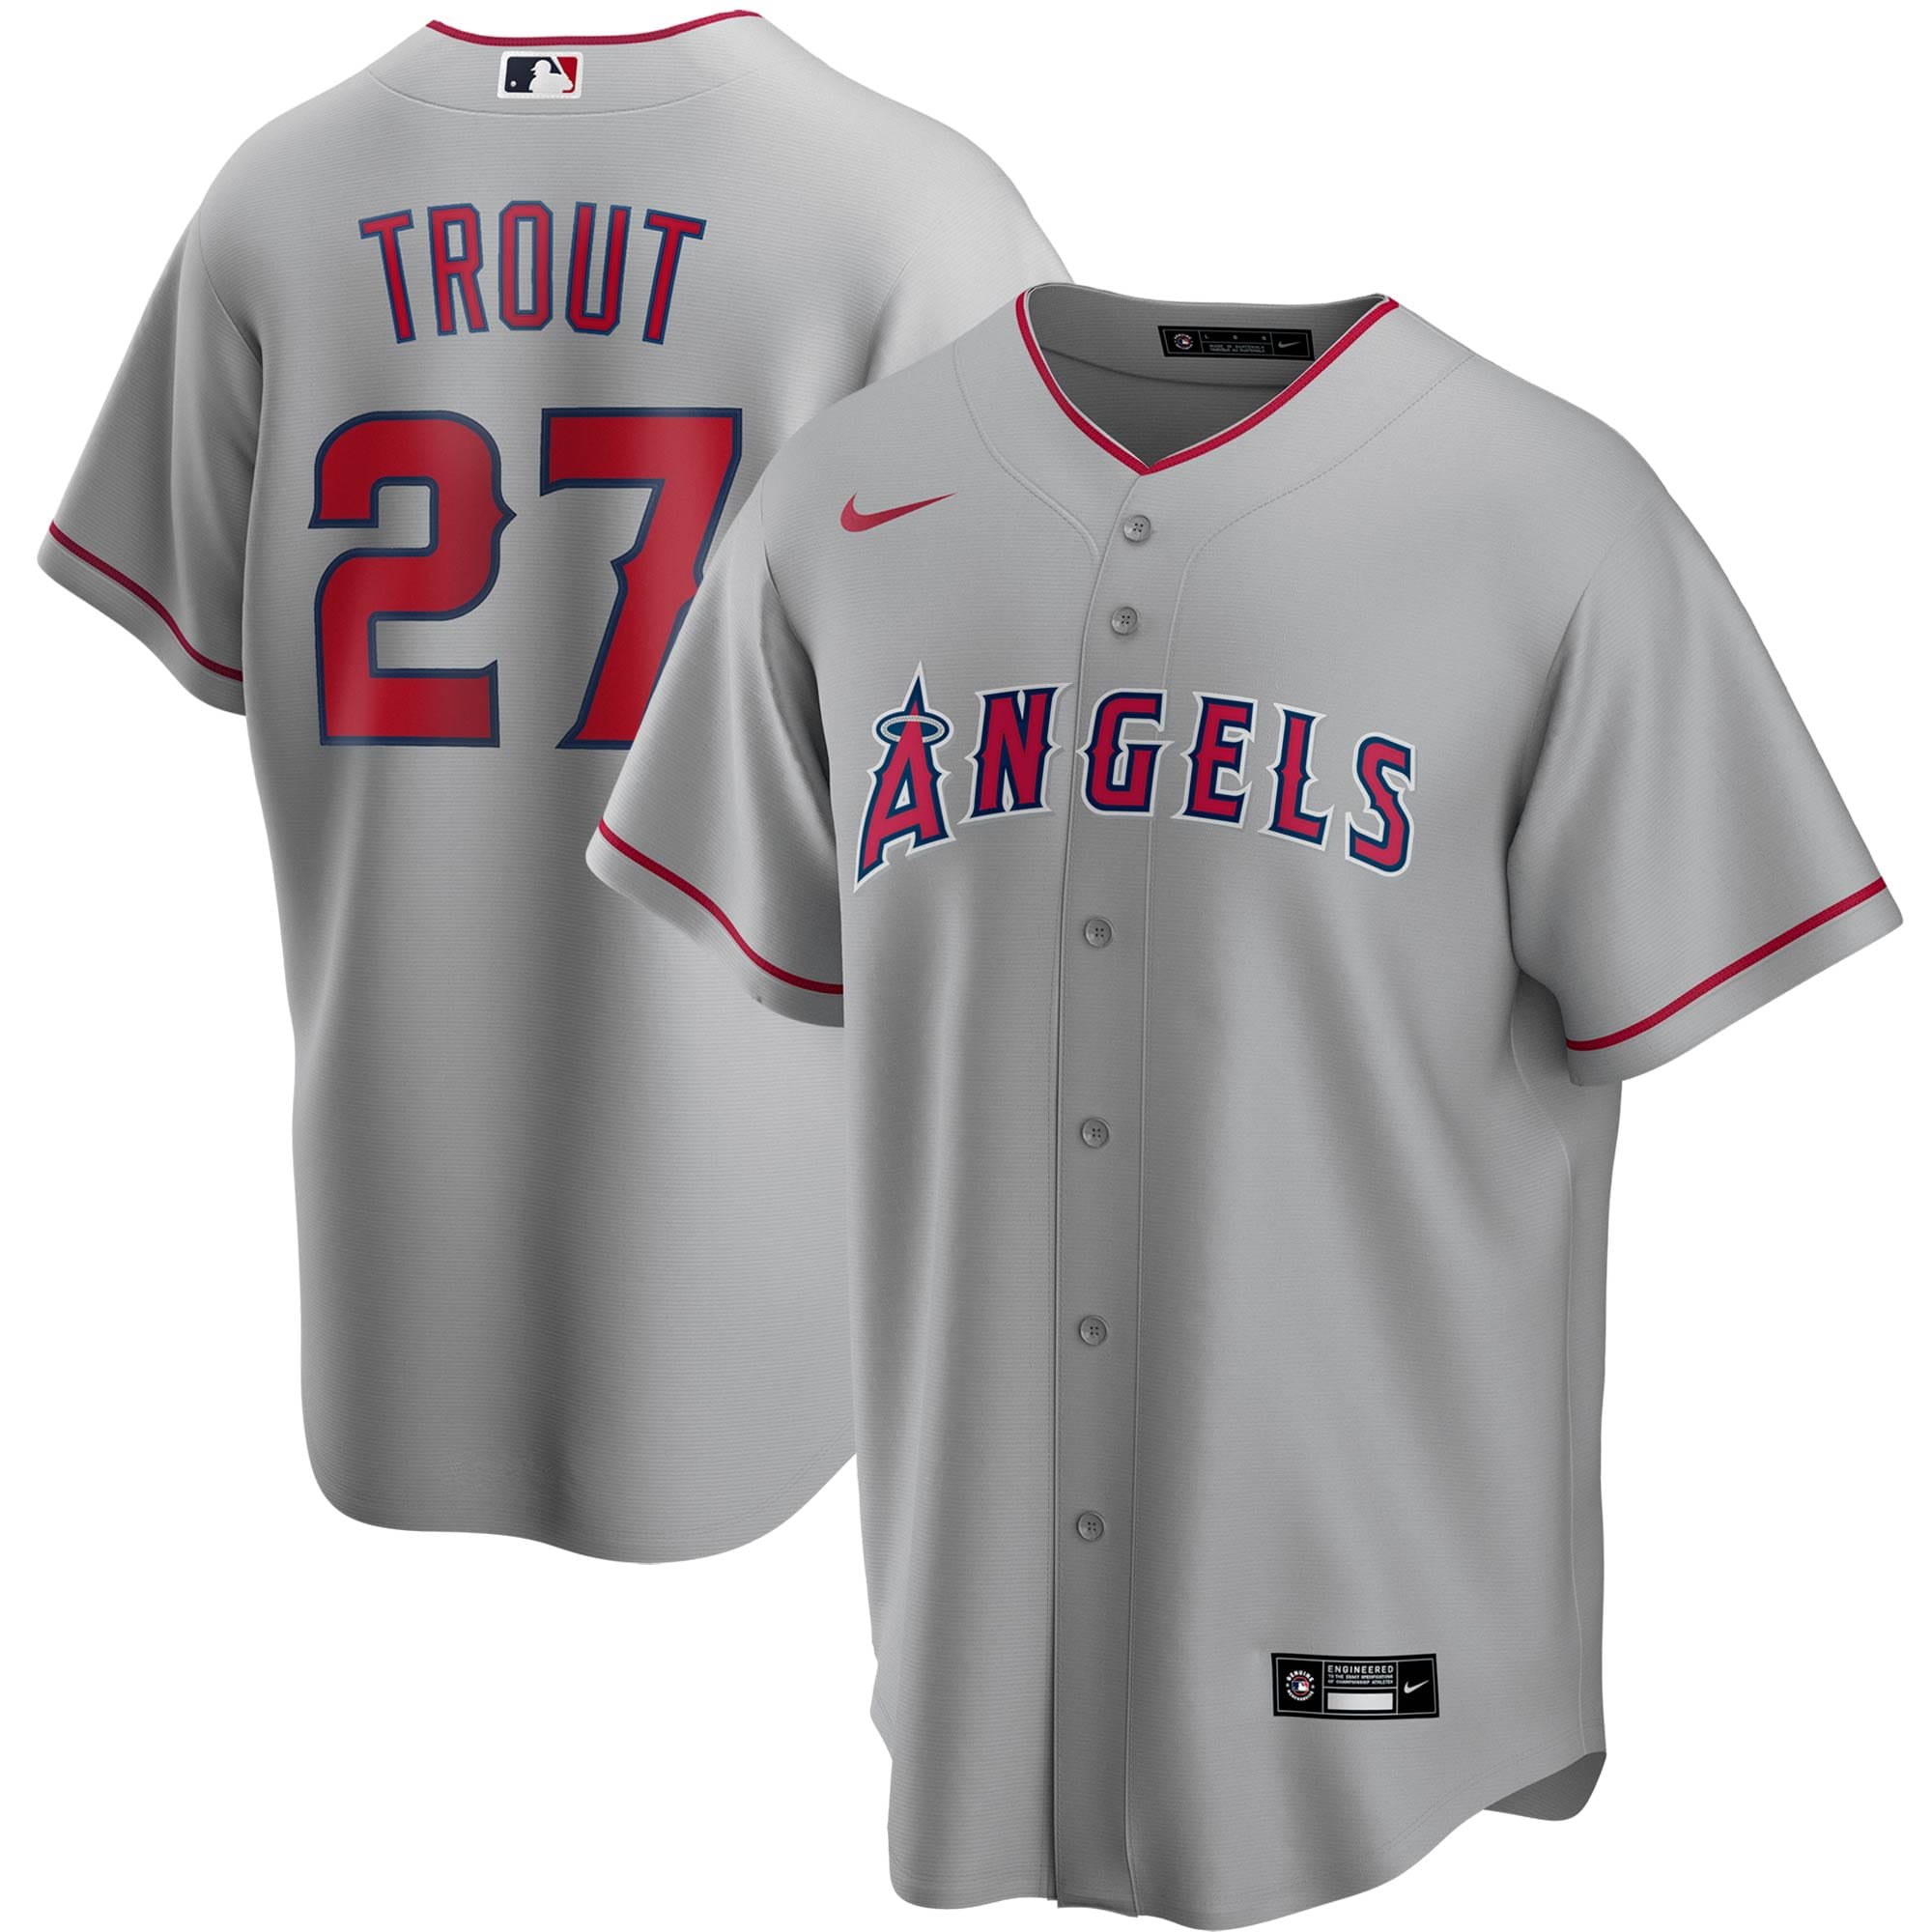 mike trout nickname jersey